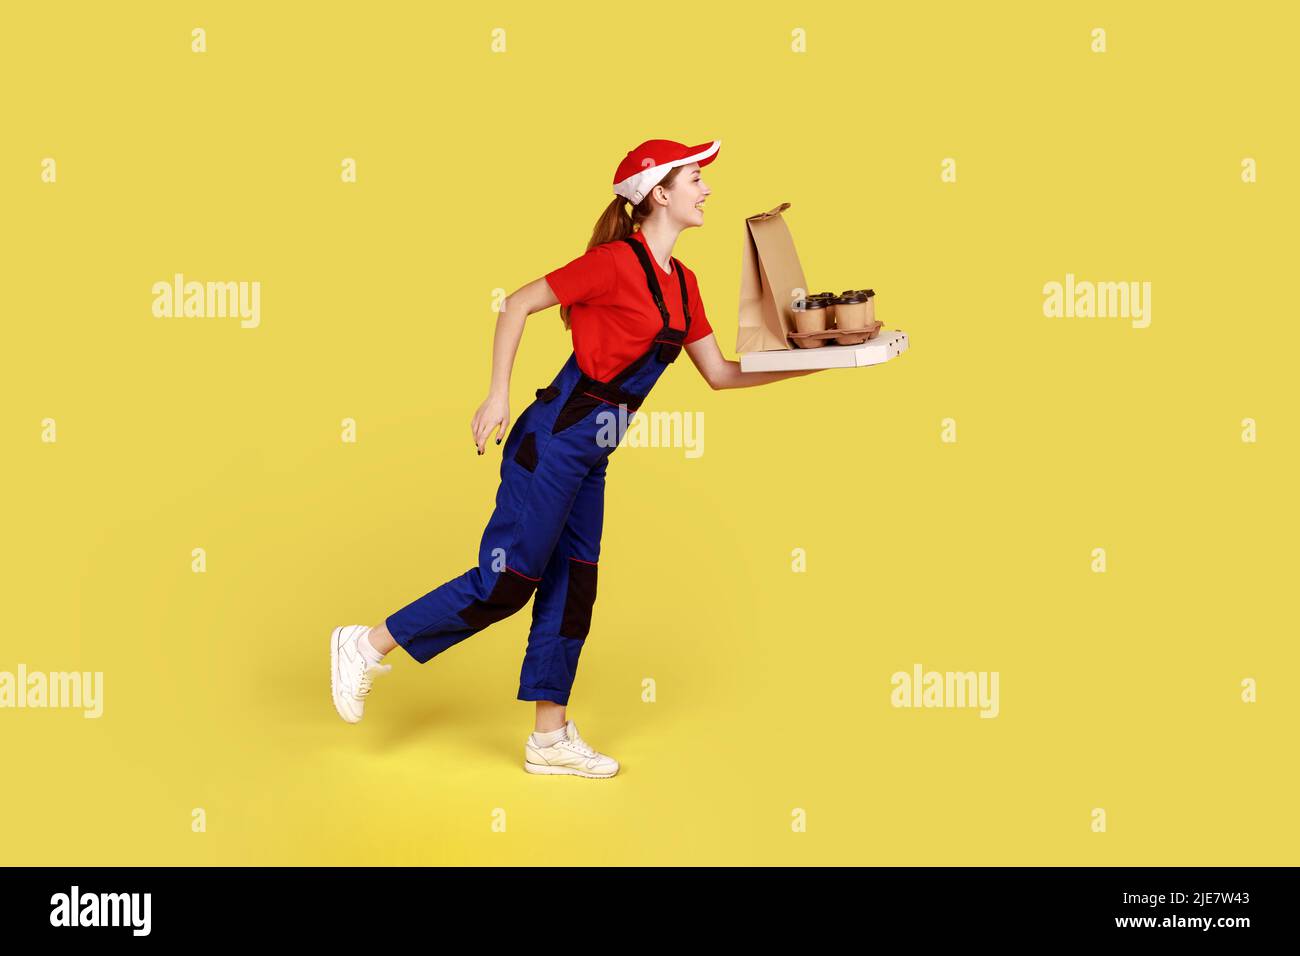 Side view portrait of delivery woman being hurry to deliver coffee with pizza, fast delivery service, wearing overalls and red cap. Indoor studio shot isolated on yellow background. Stock Photo